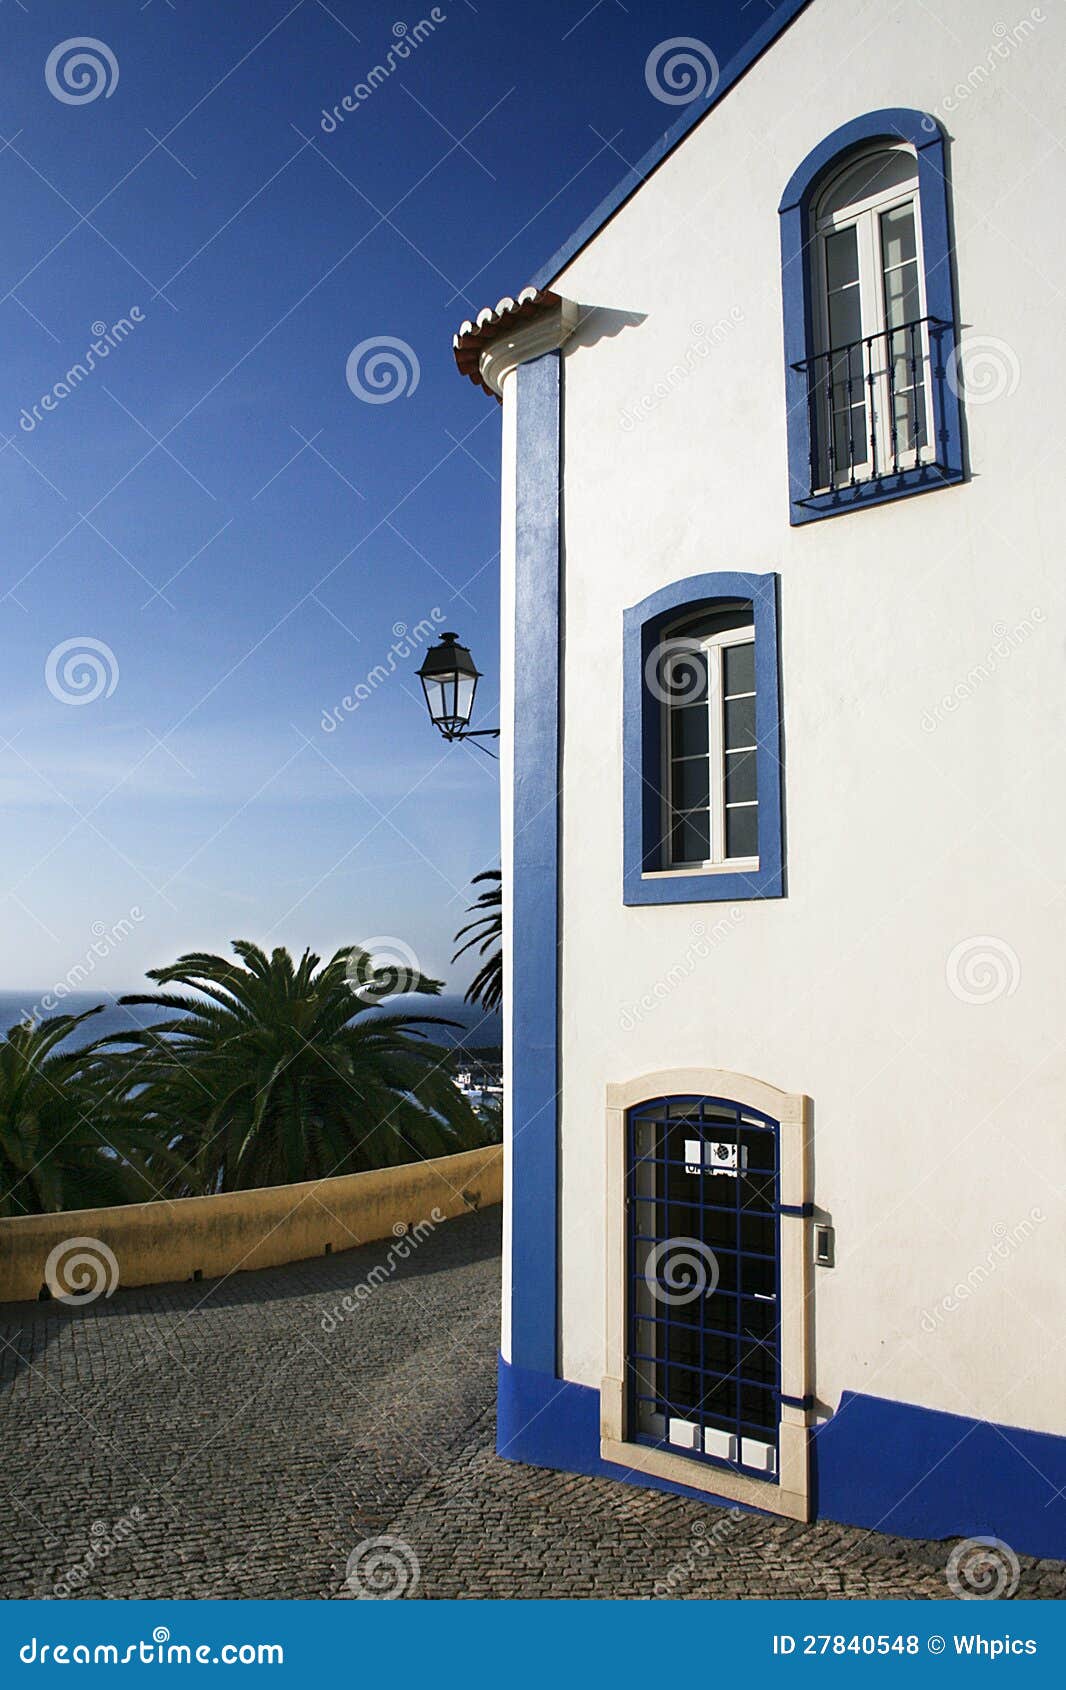 house of the hill. sines, portugal